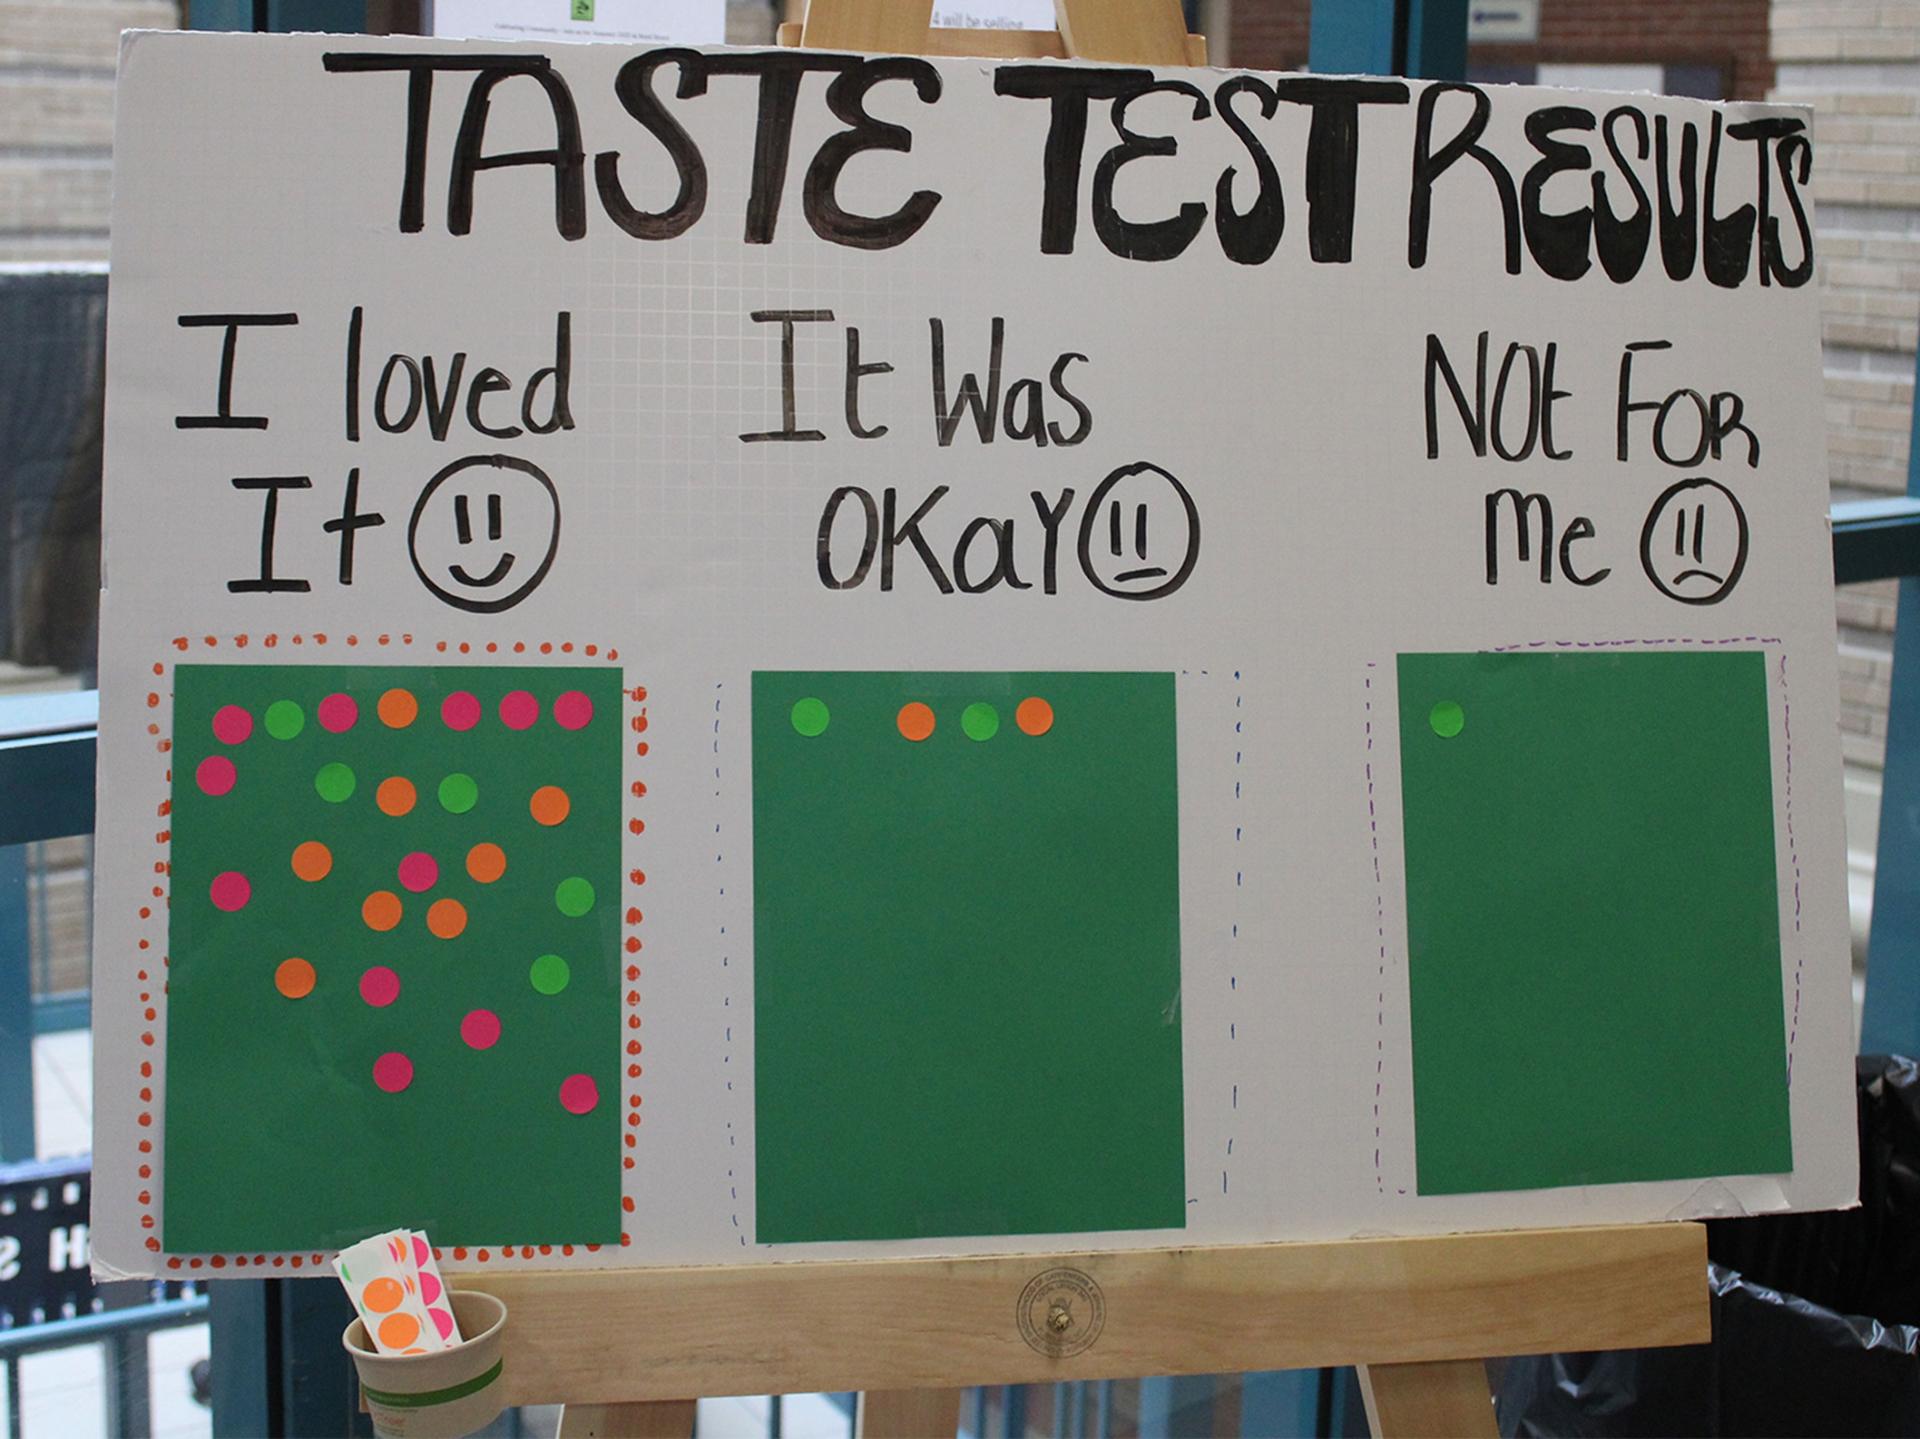 Students were asked to give feedback on the dishes through focus groups, written responses, and by voting on boards like this one at Portland High School.